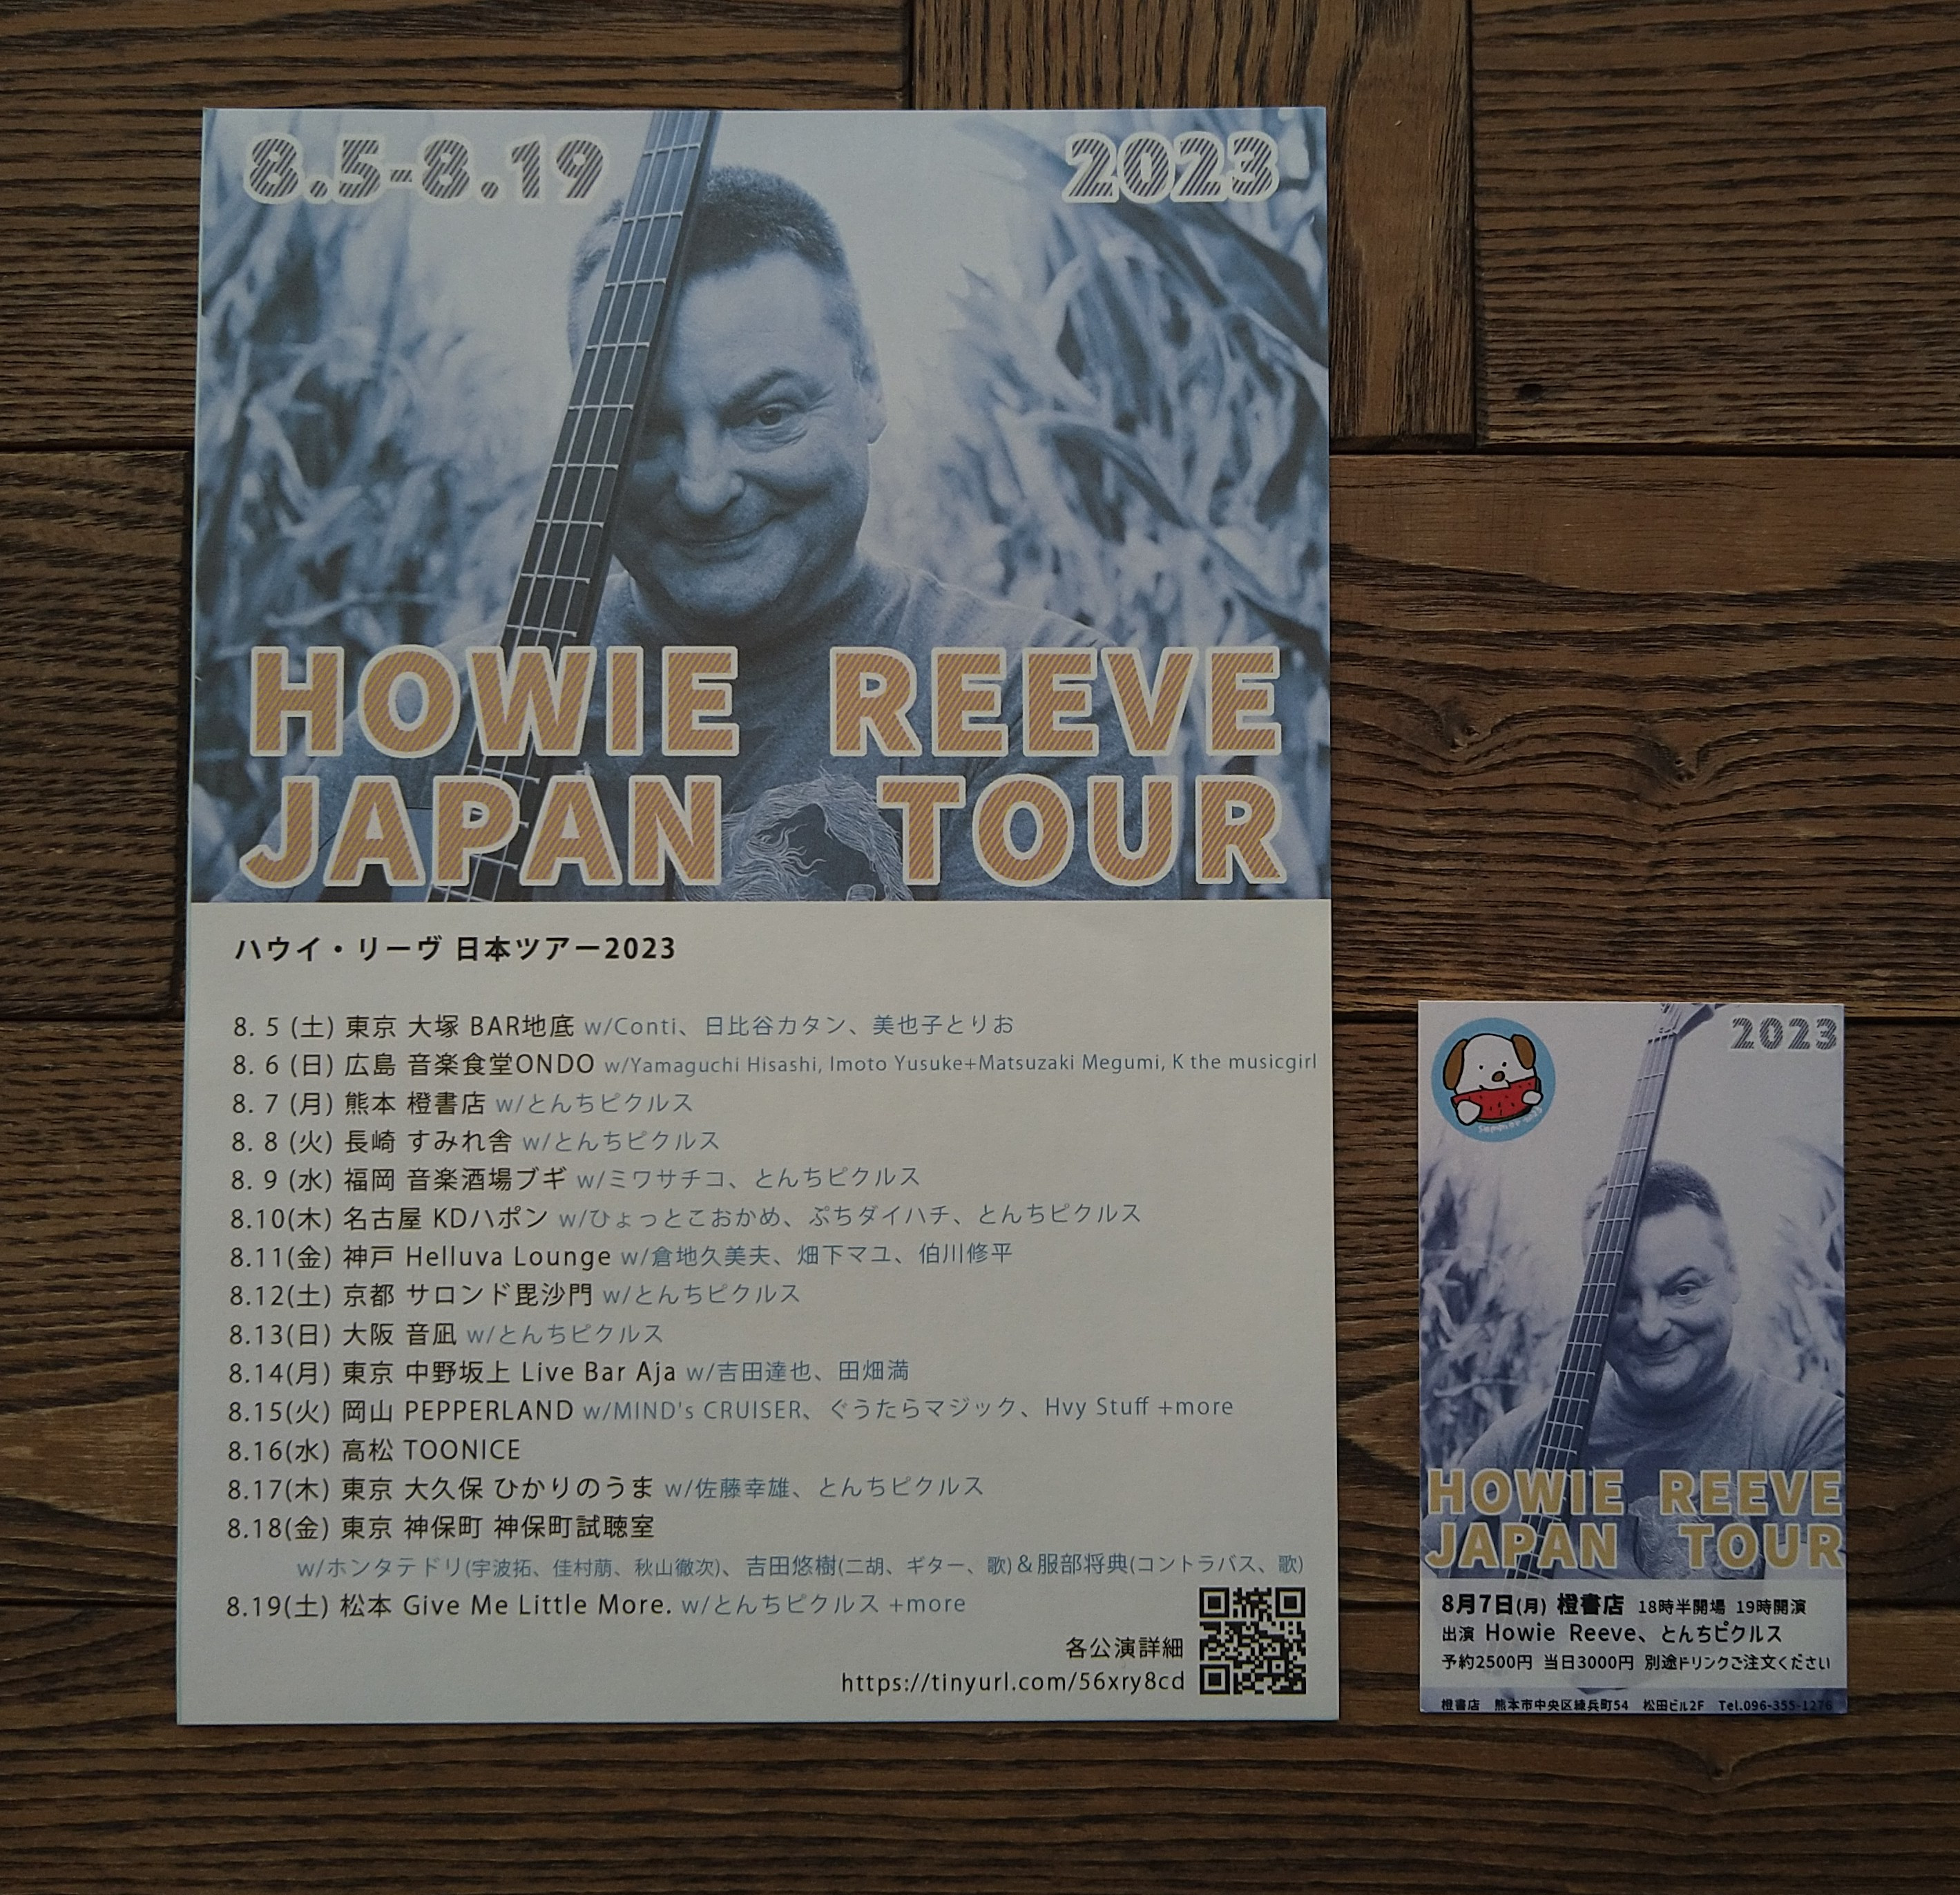 HOWIE REEVE JAPAN TOUR 2023 のお知らせ　（ｗ/とんちピクルス）